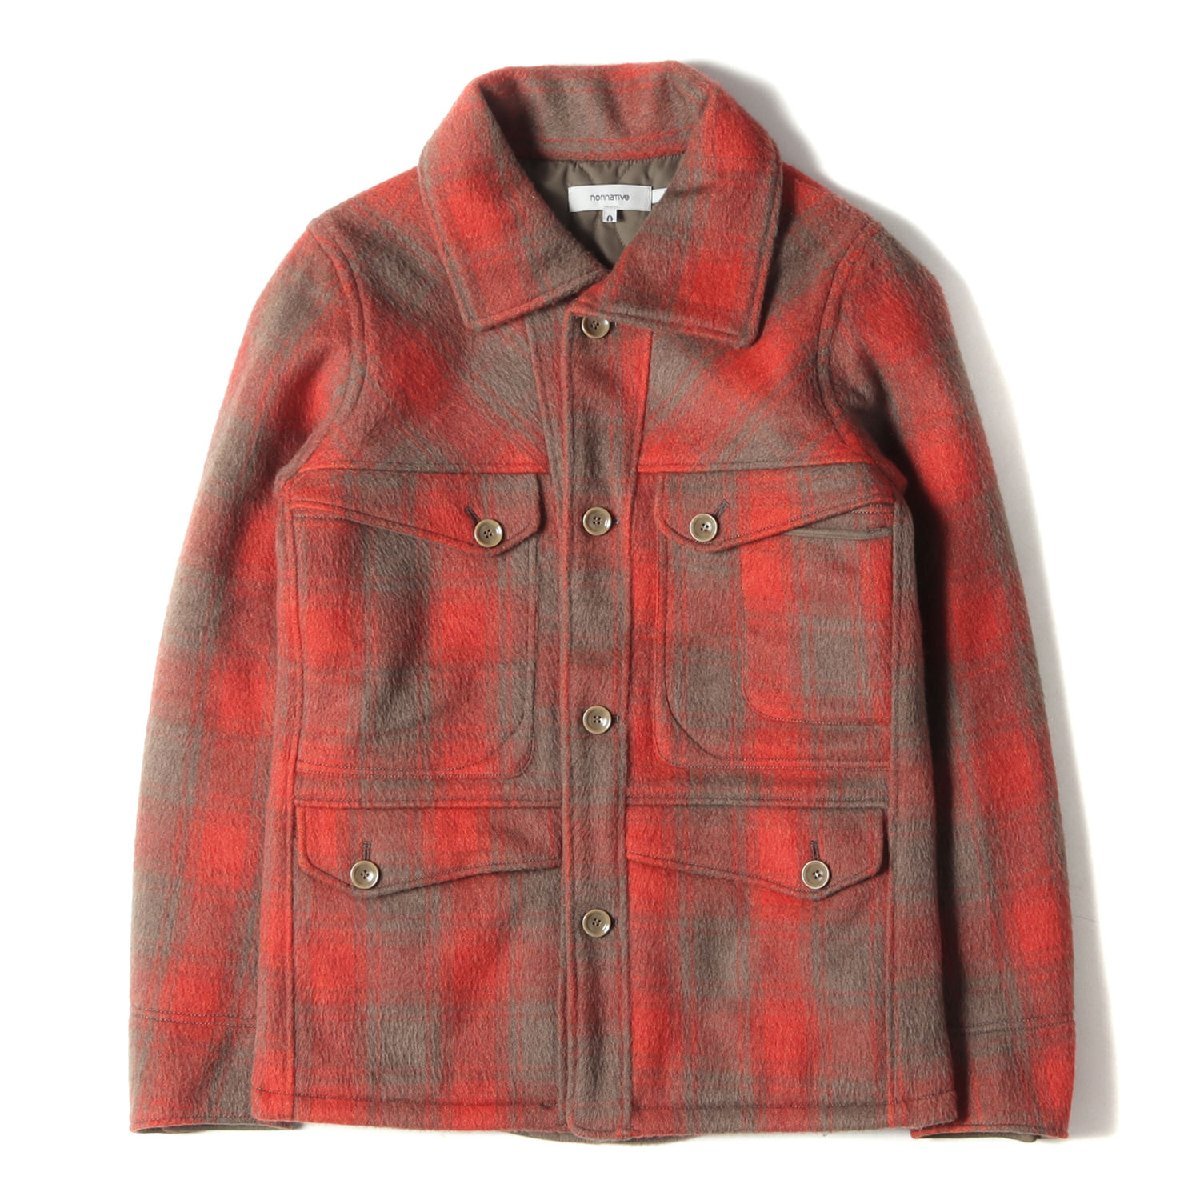 NONNATIVE Nonnative jacket size :0 check melt n wool lining quilting hunting jacket red Brown 